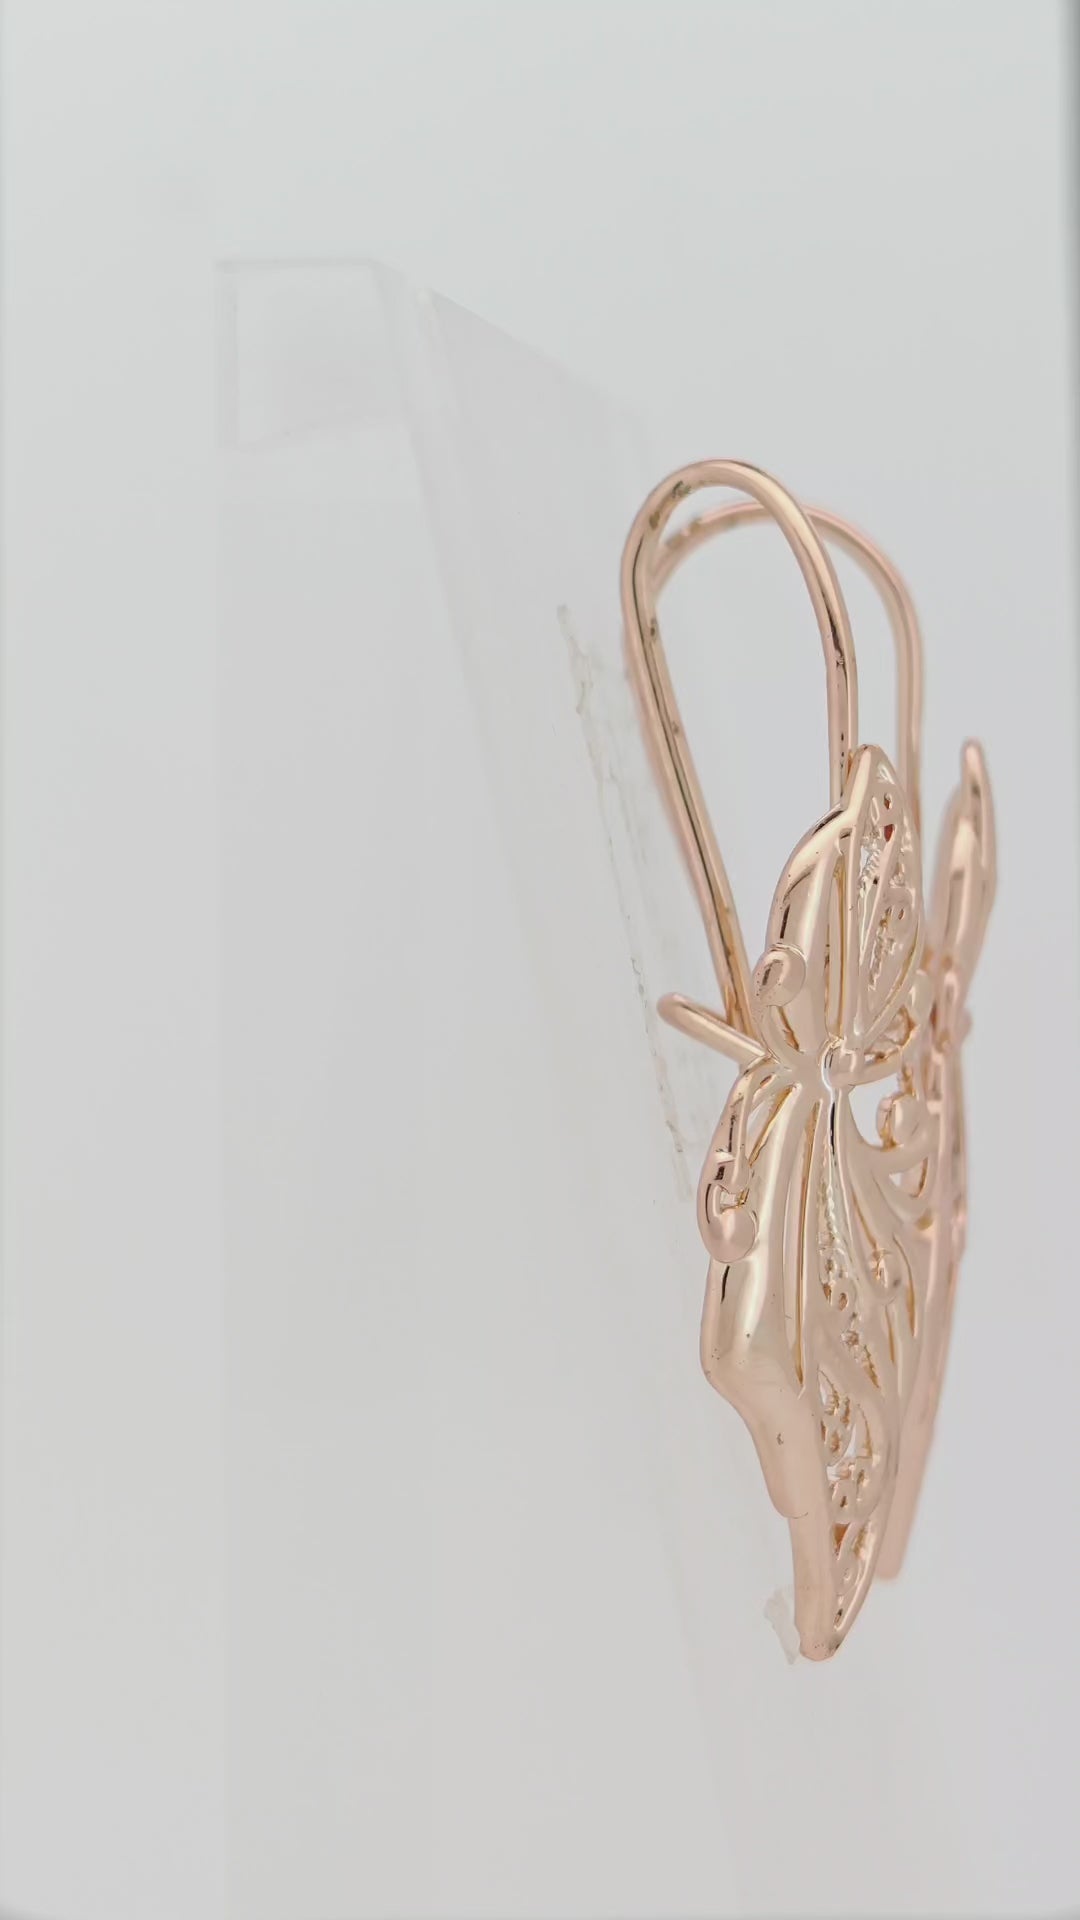 .Flower wire hook earrings in Rose Gold, two tone plating colors